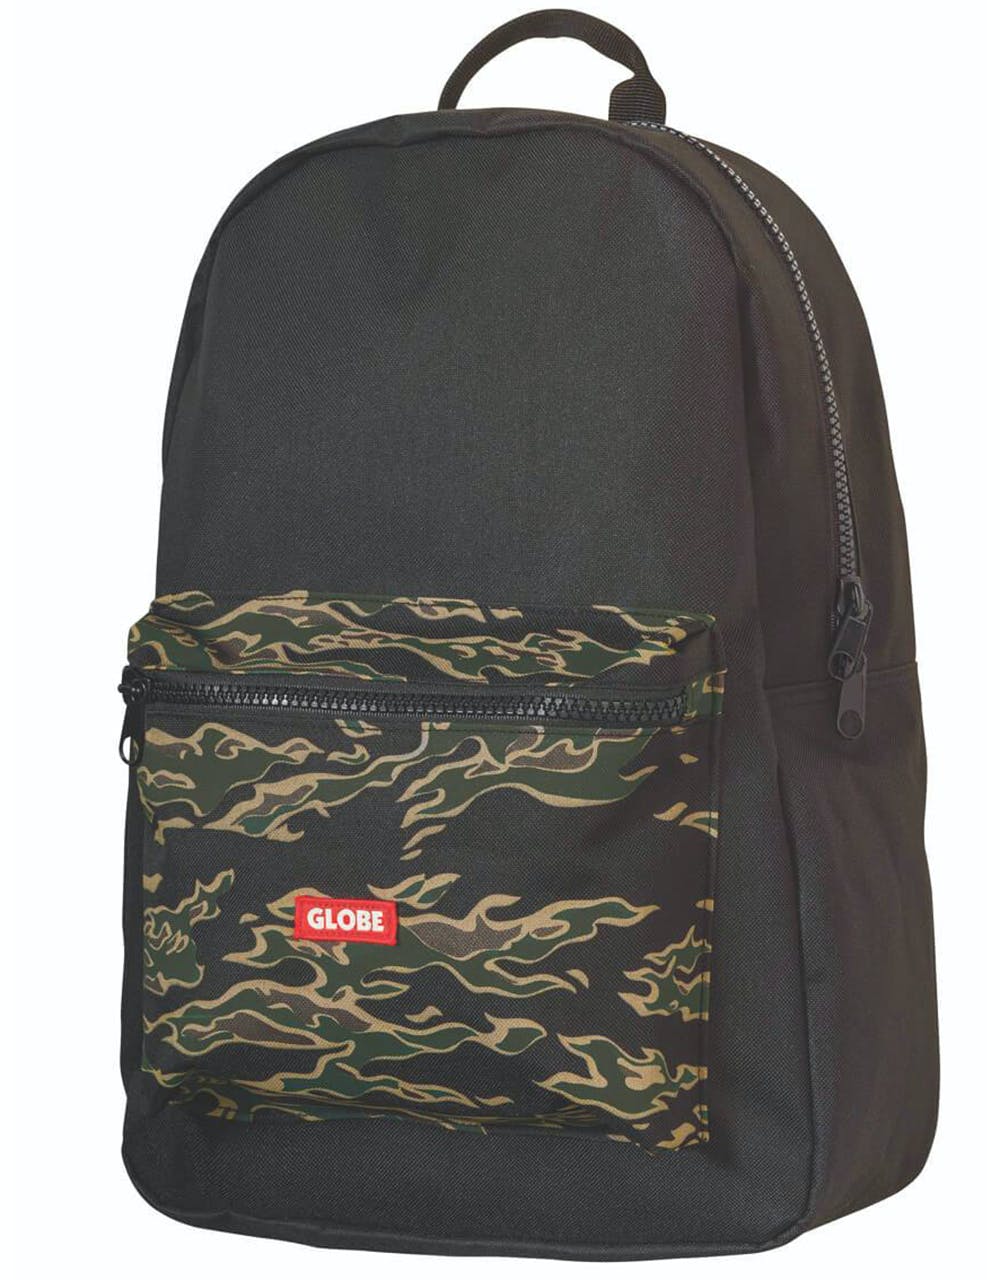 Globe Deluxe Backpack - Tiger Camo